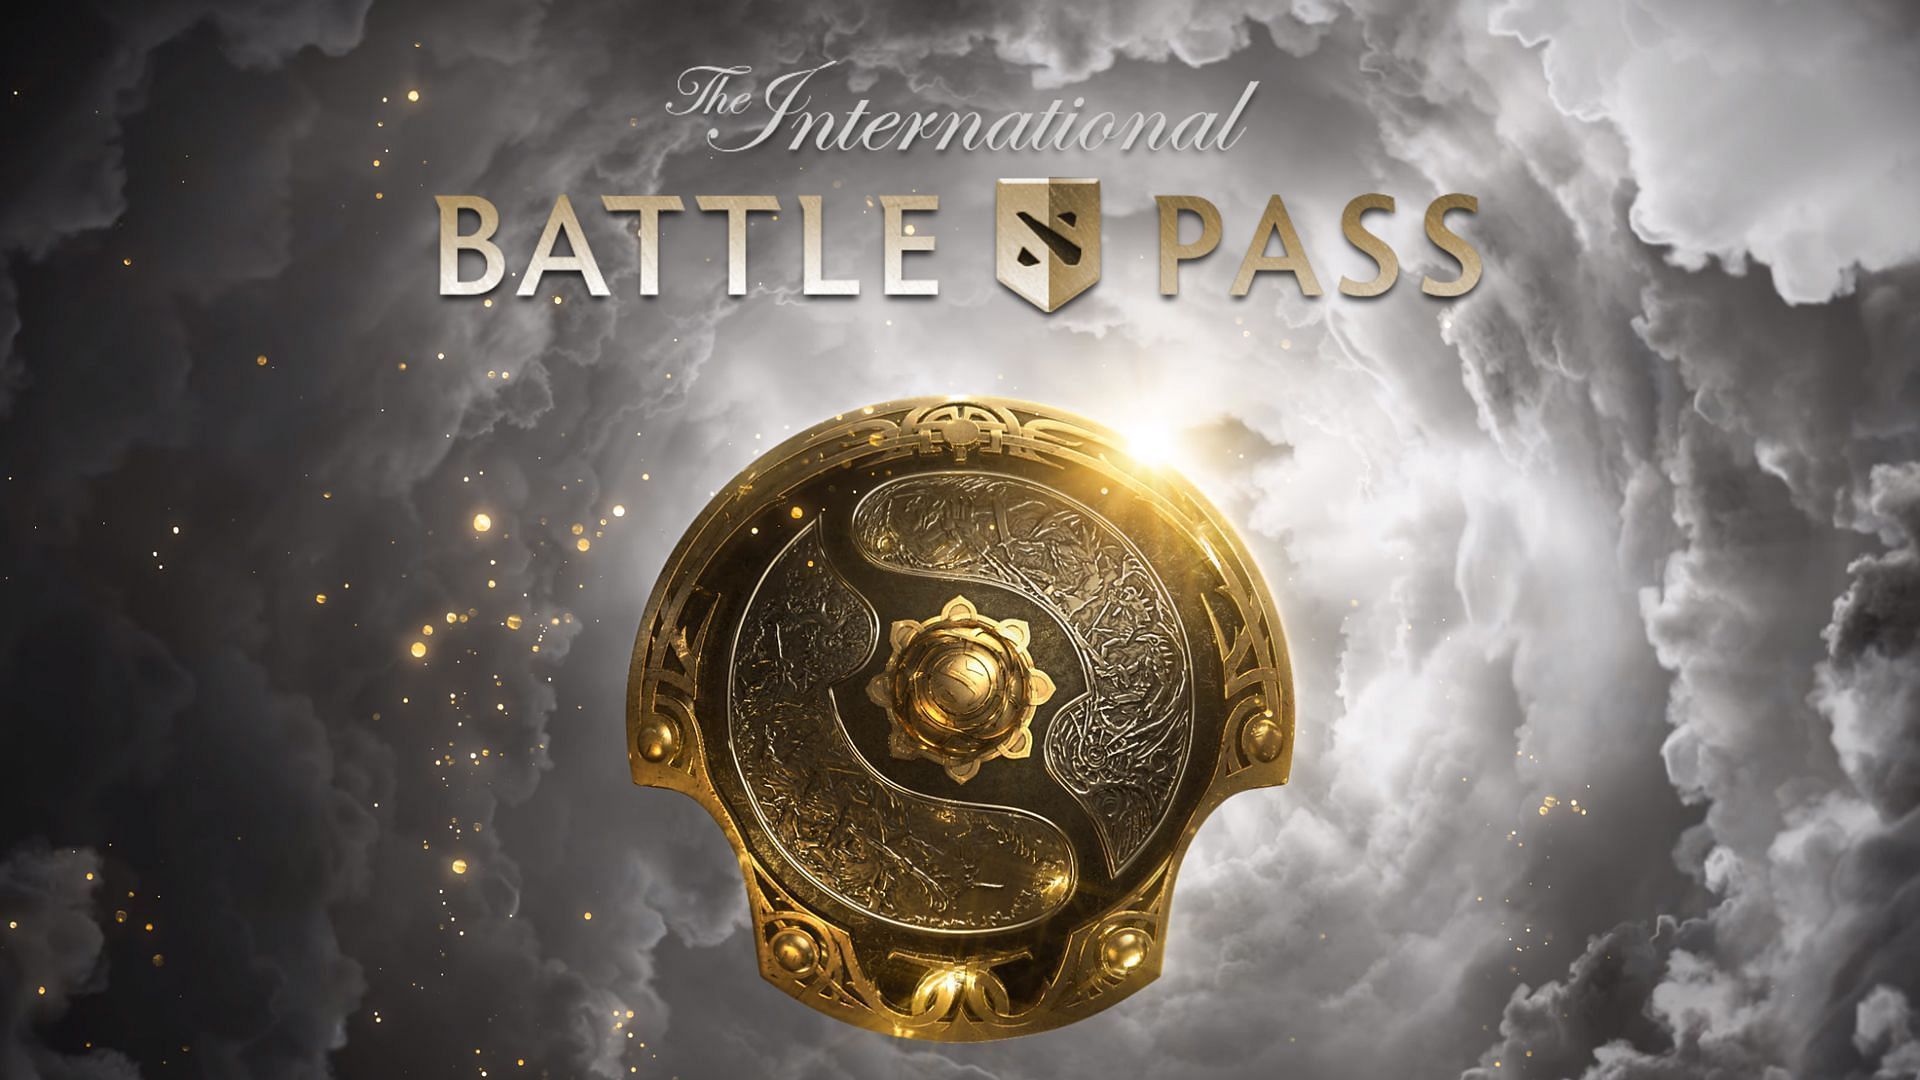 Battle Pass 2022 is coming in September (Image via Valve)